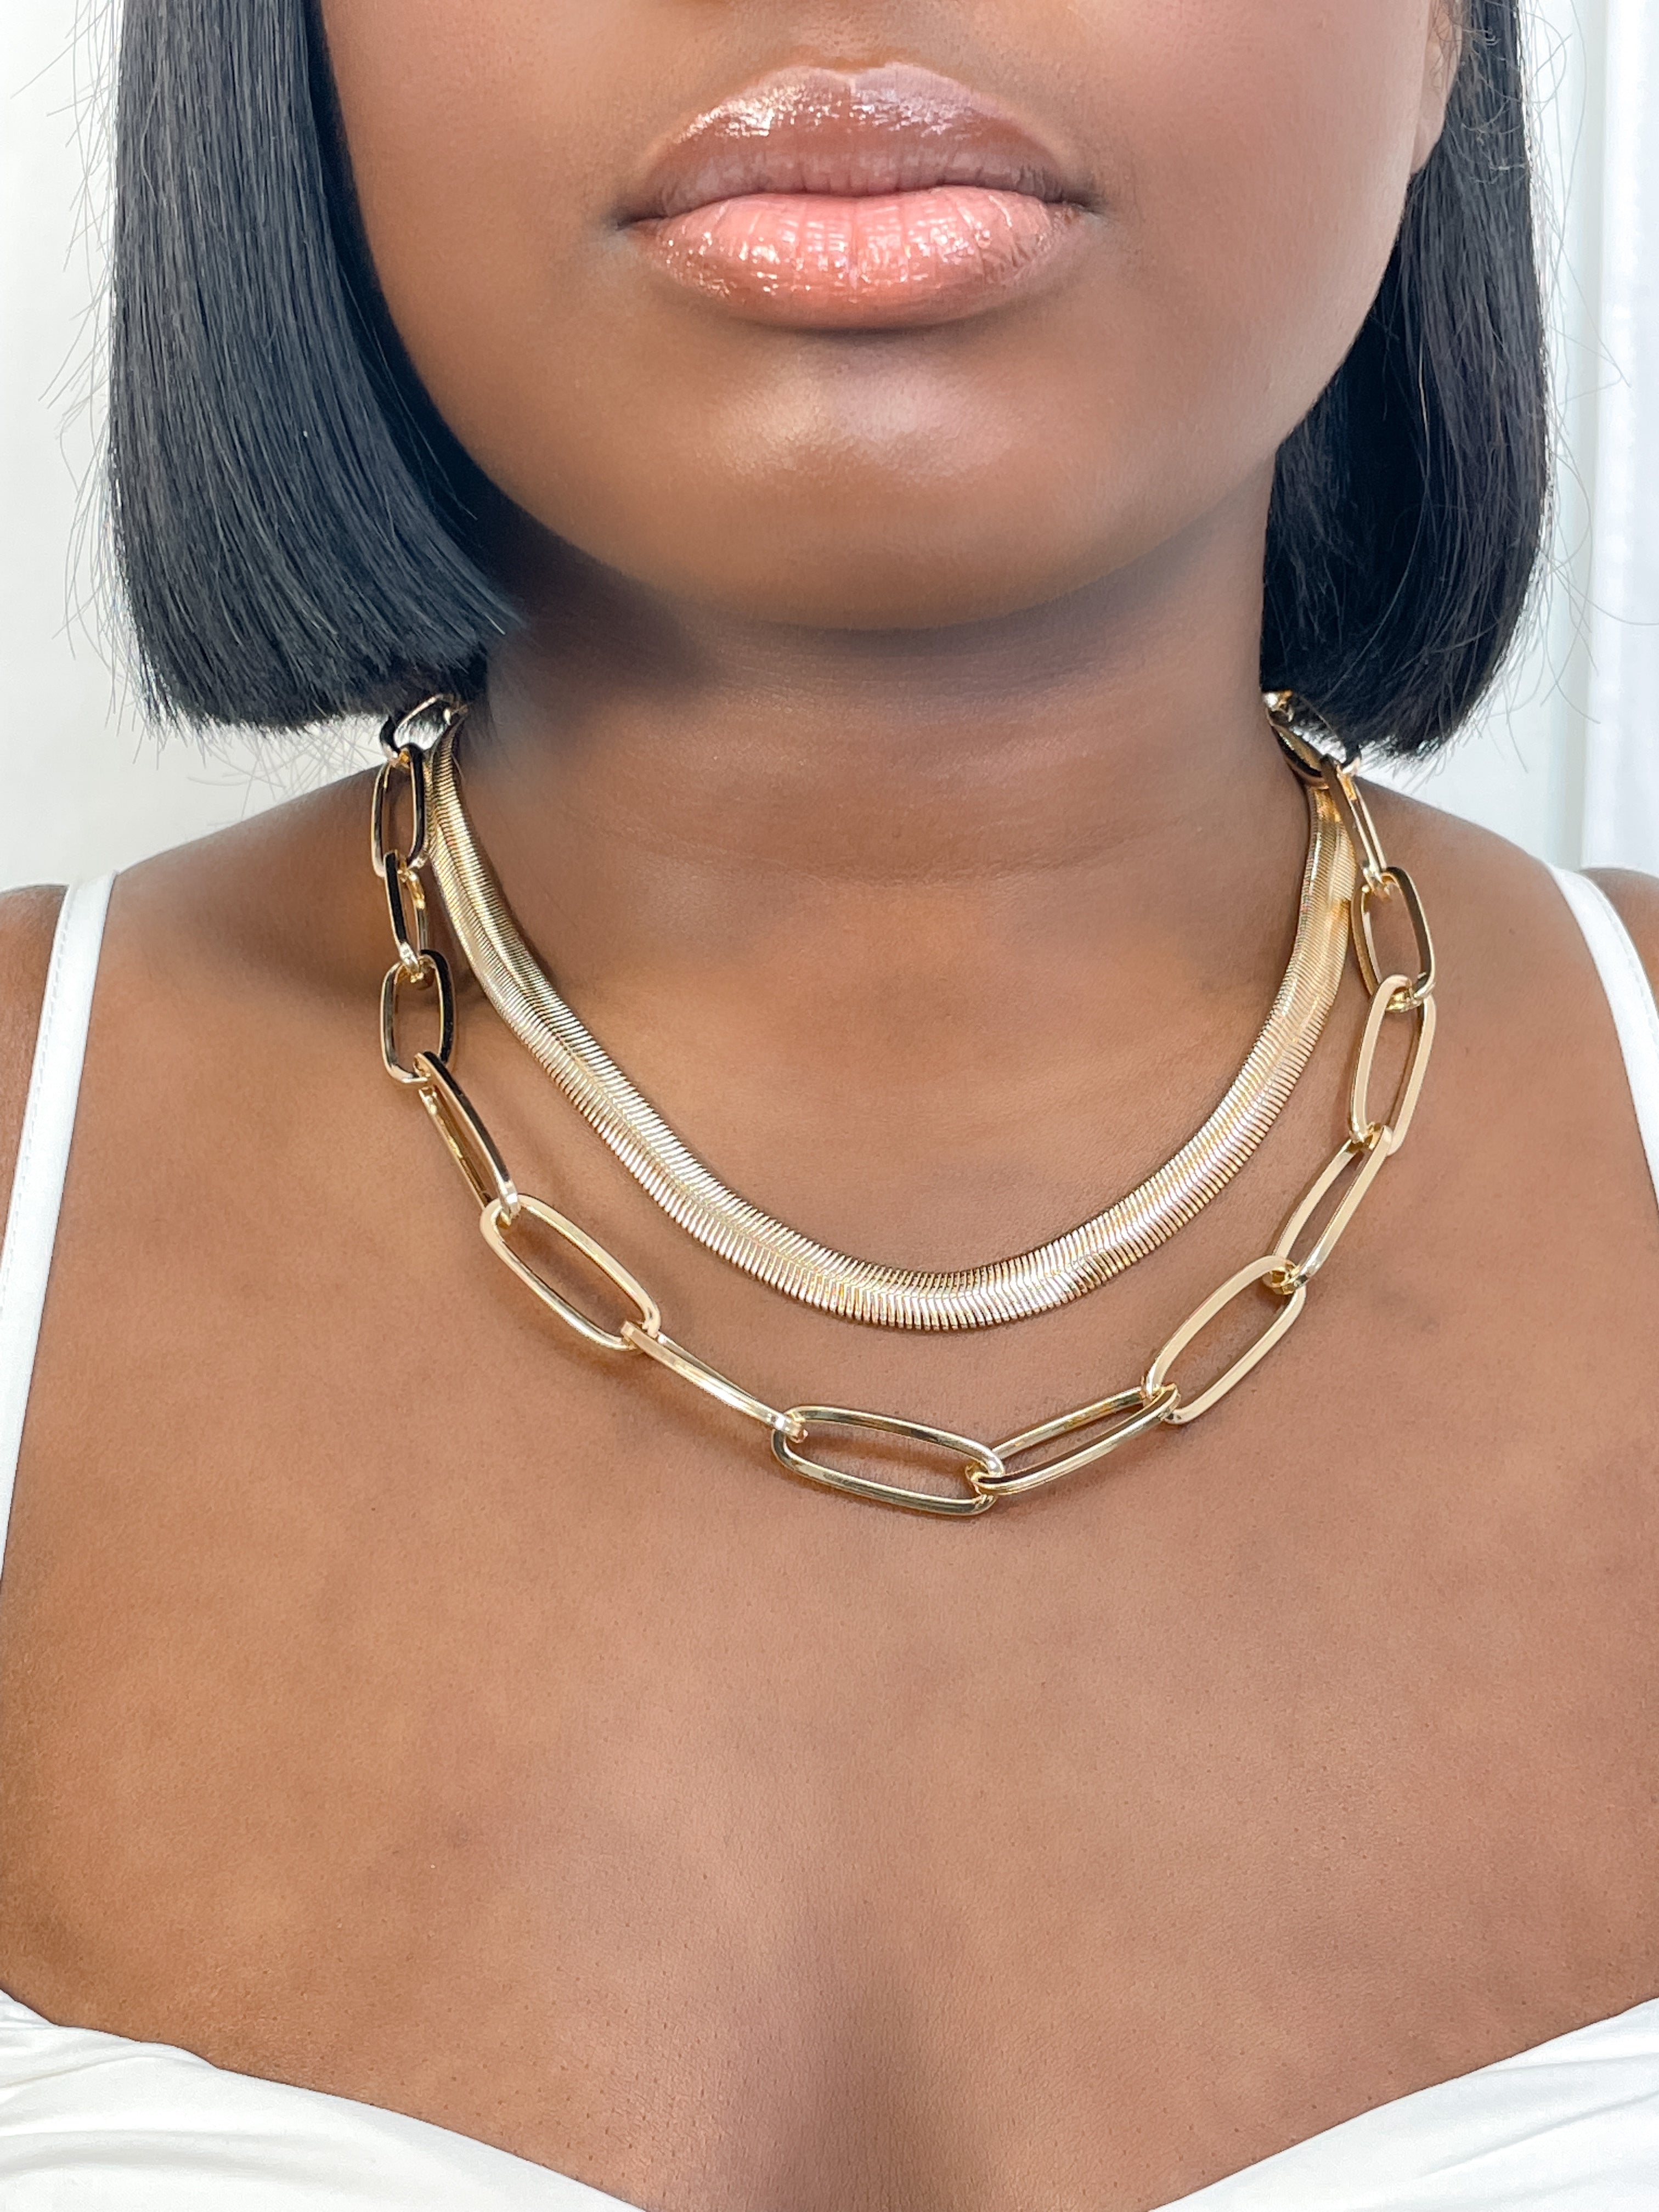 GOLD HERRINGBONE AND CHUNKY LINK CHAIN NECKLACE SET